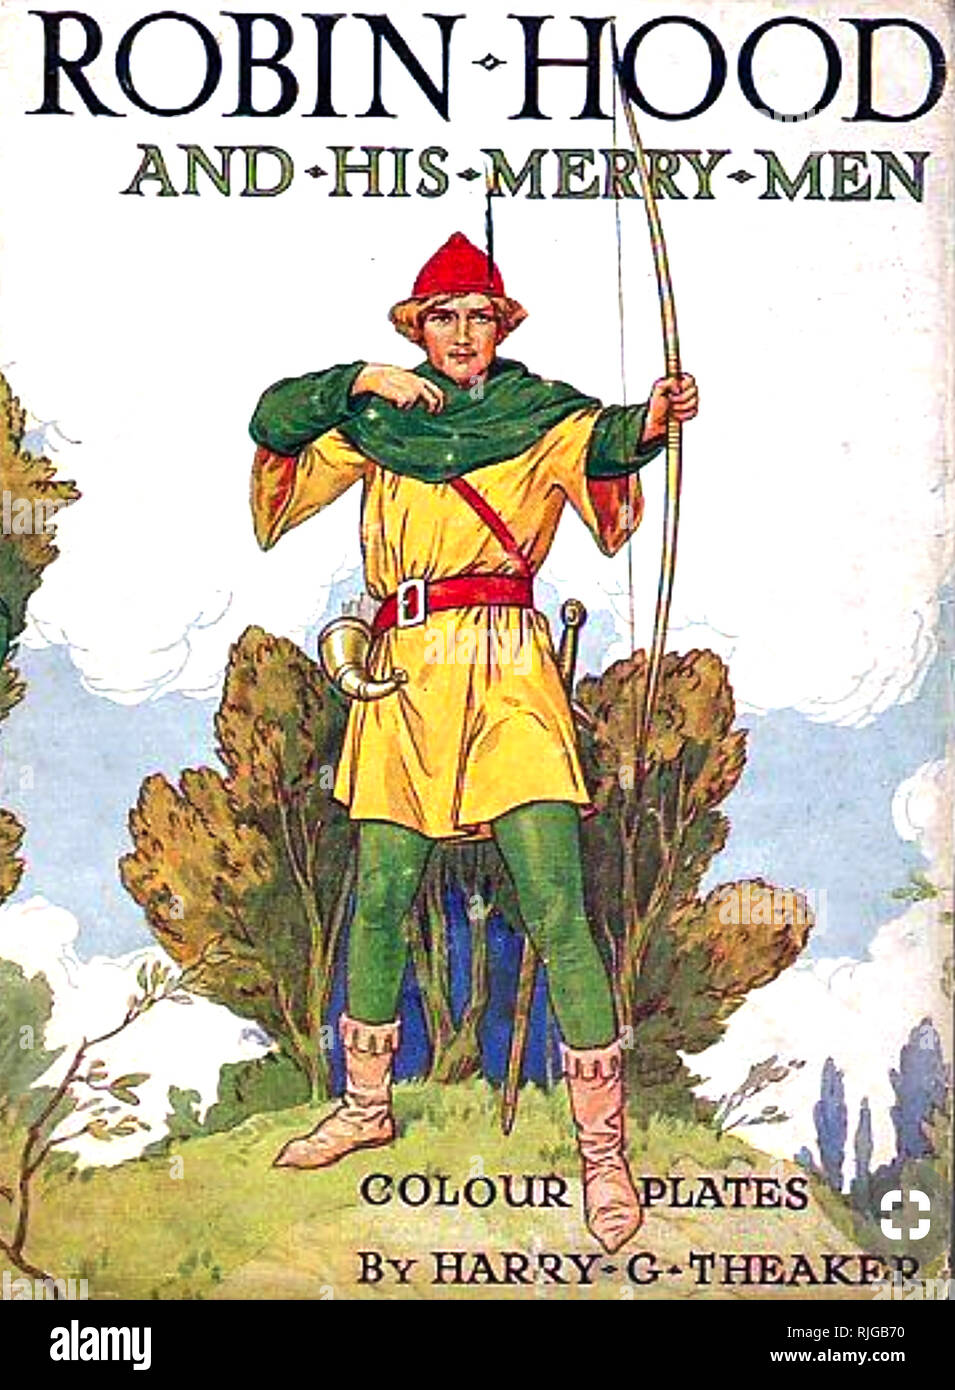 HARRY G. THEAKER (1873-1954) English illustrator. Cover of a 1920s edition of Robin Hood. Stock Photo